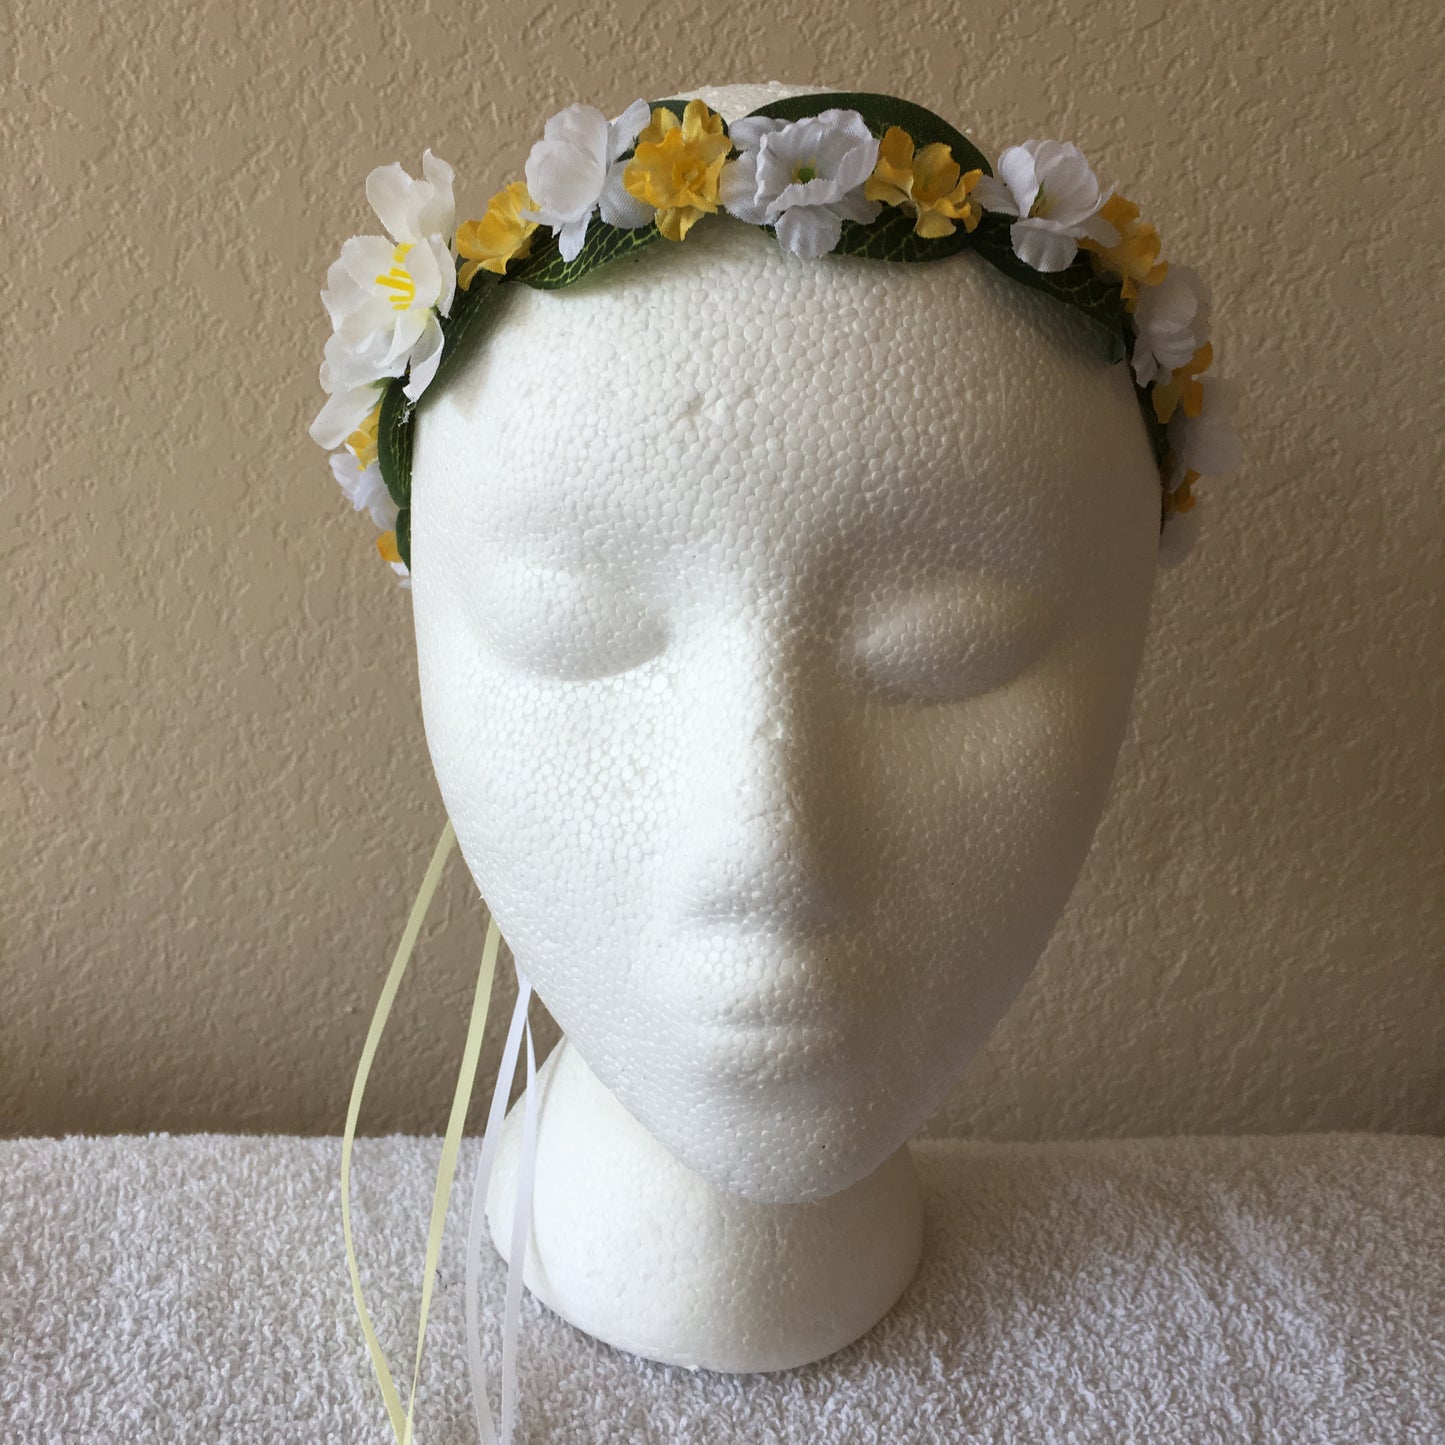 Extra Small Wreath - White & yellow flowers